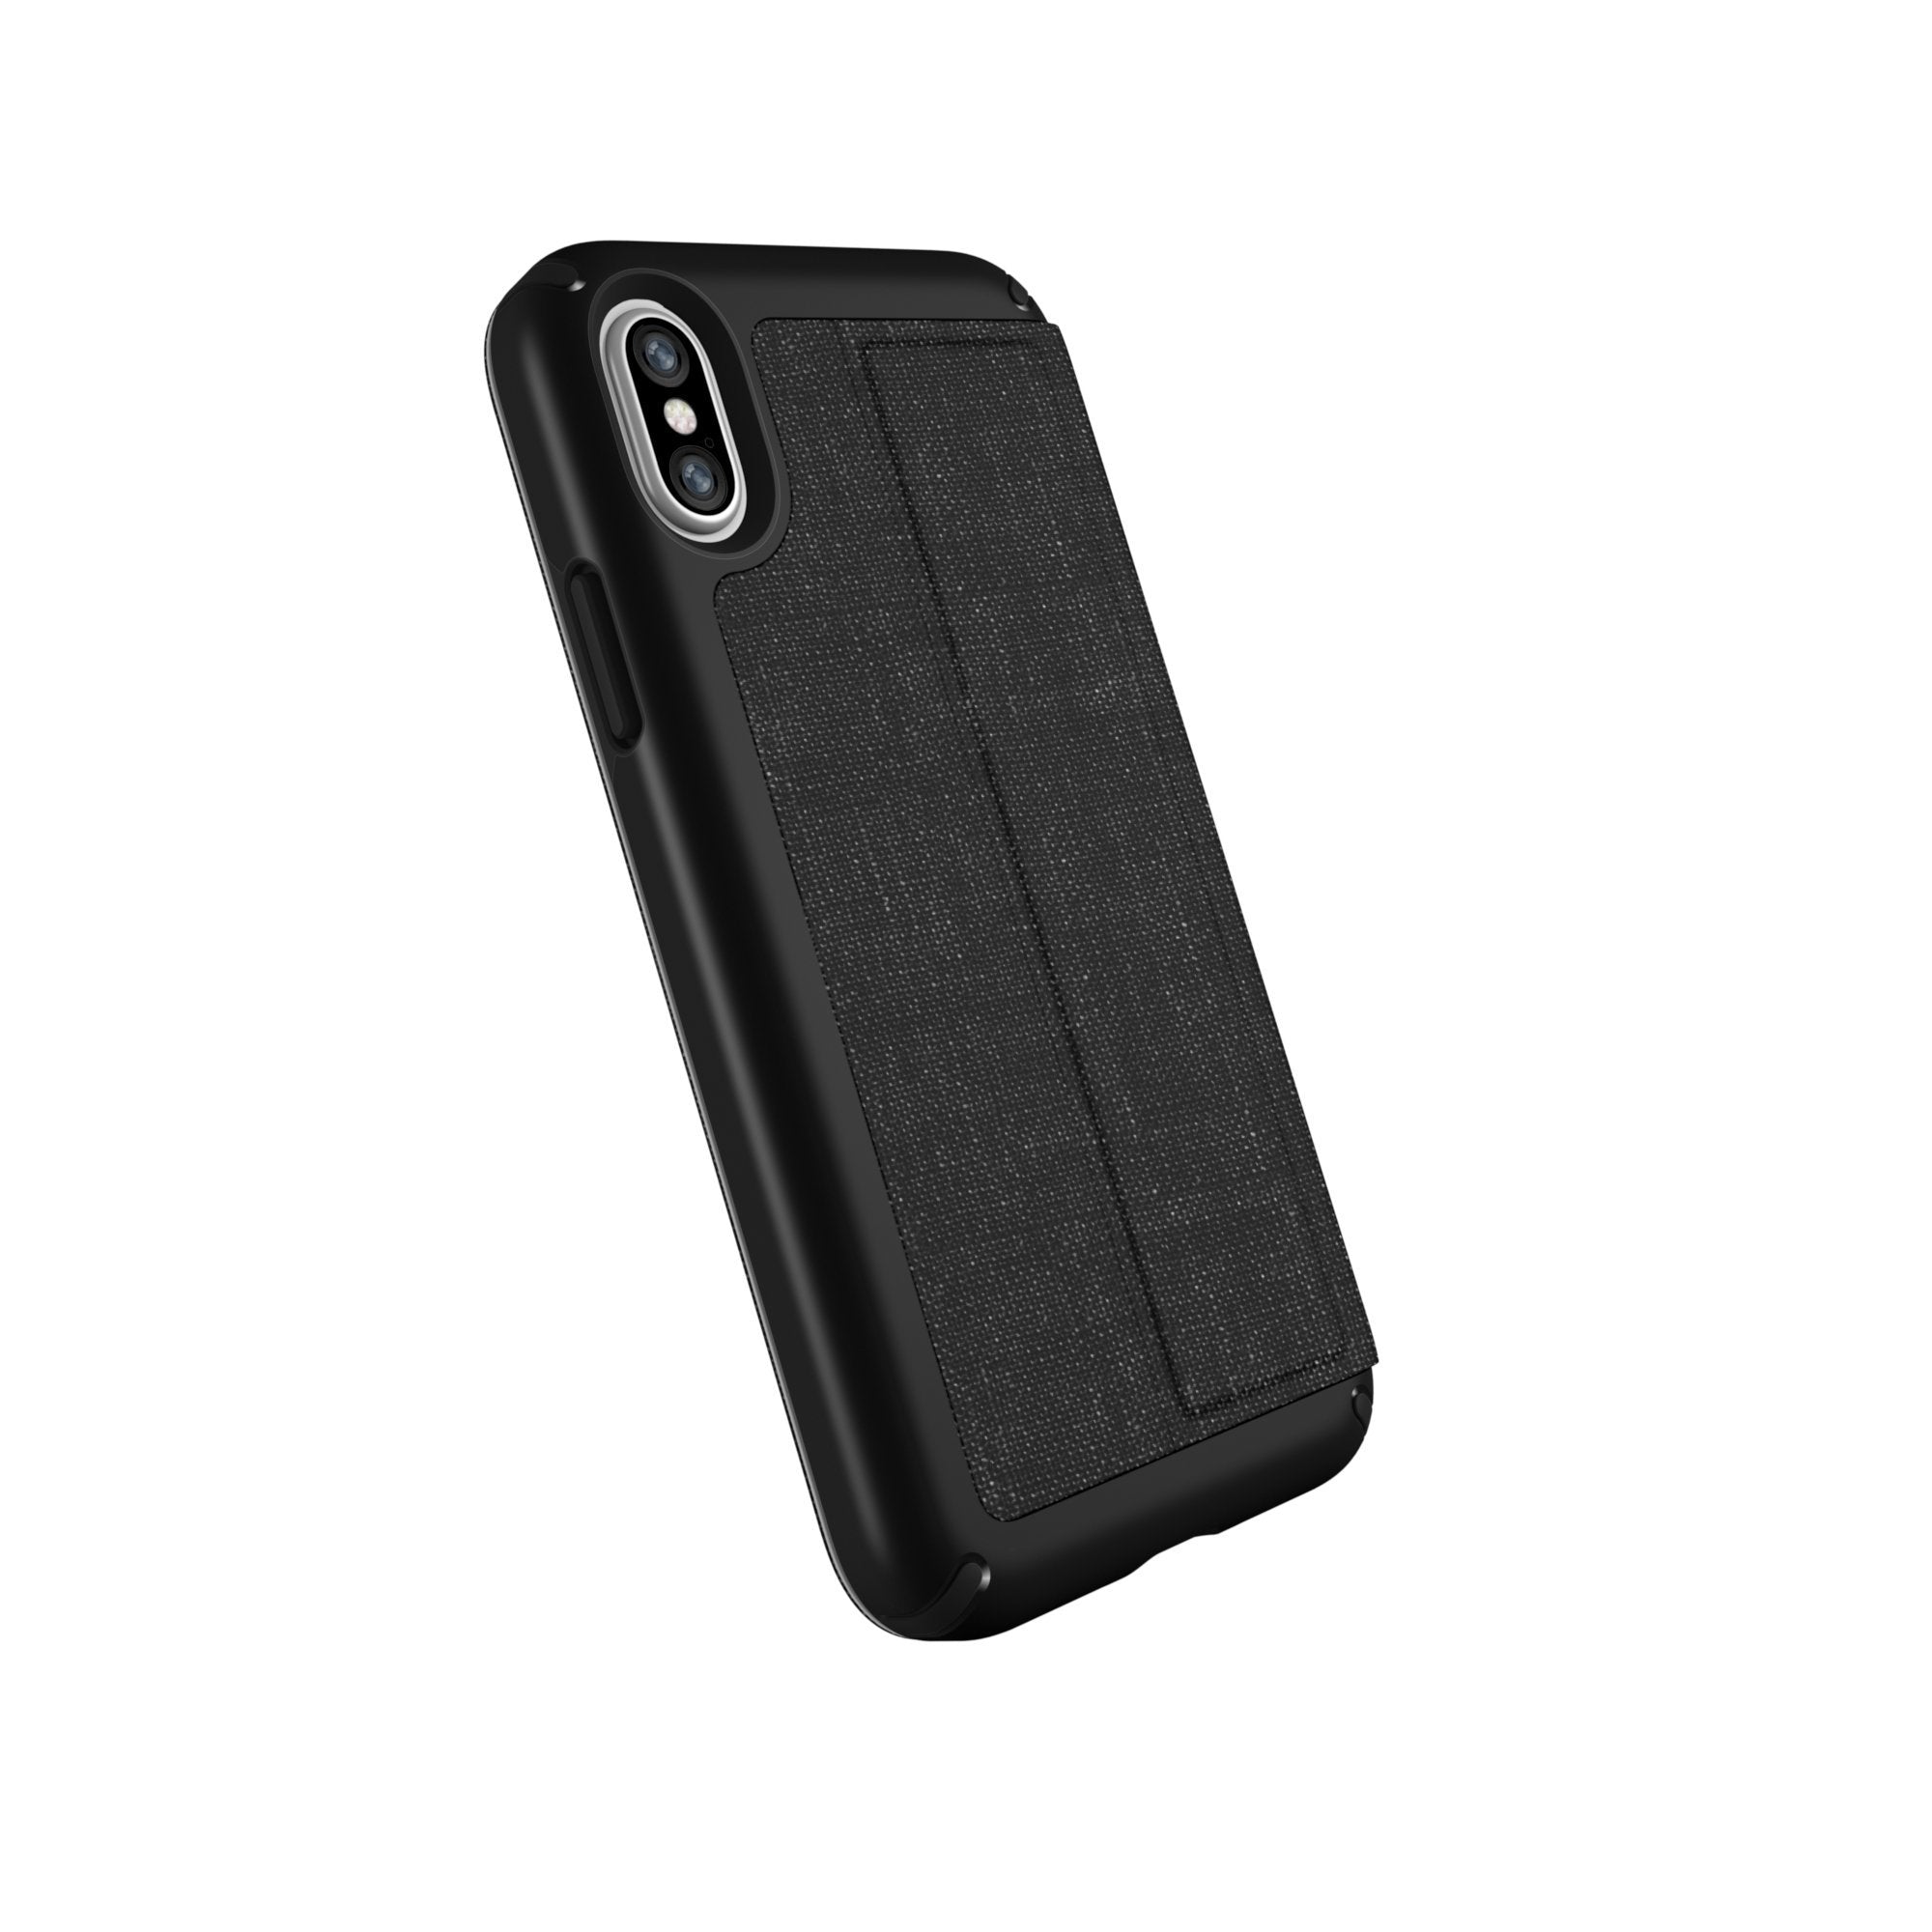 Speck Presidio Folio Case with Privacy Screen Protector and Secure Card Slot for iPhone X  - Like New